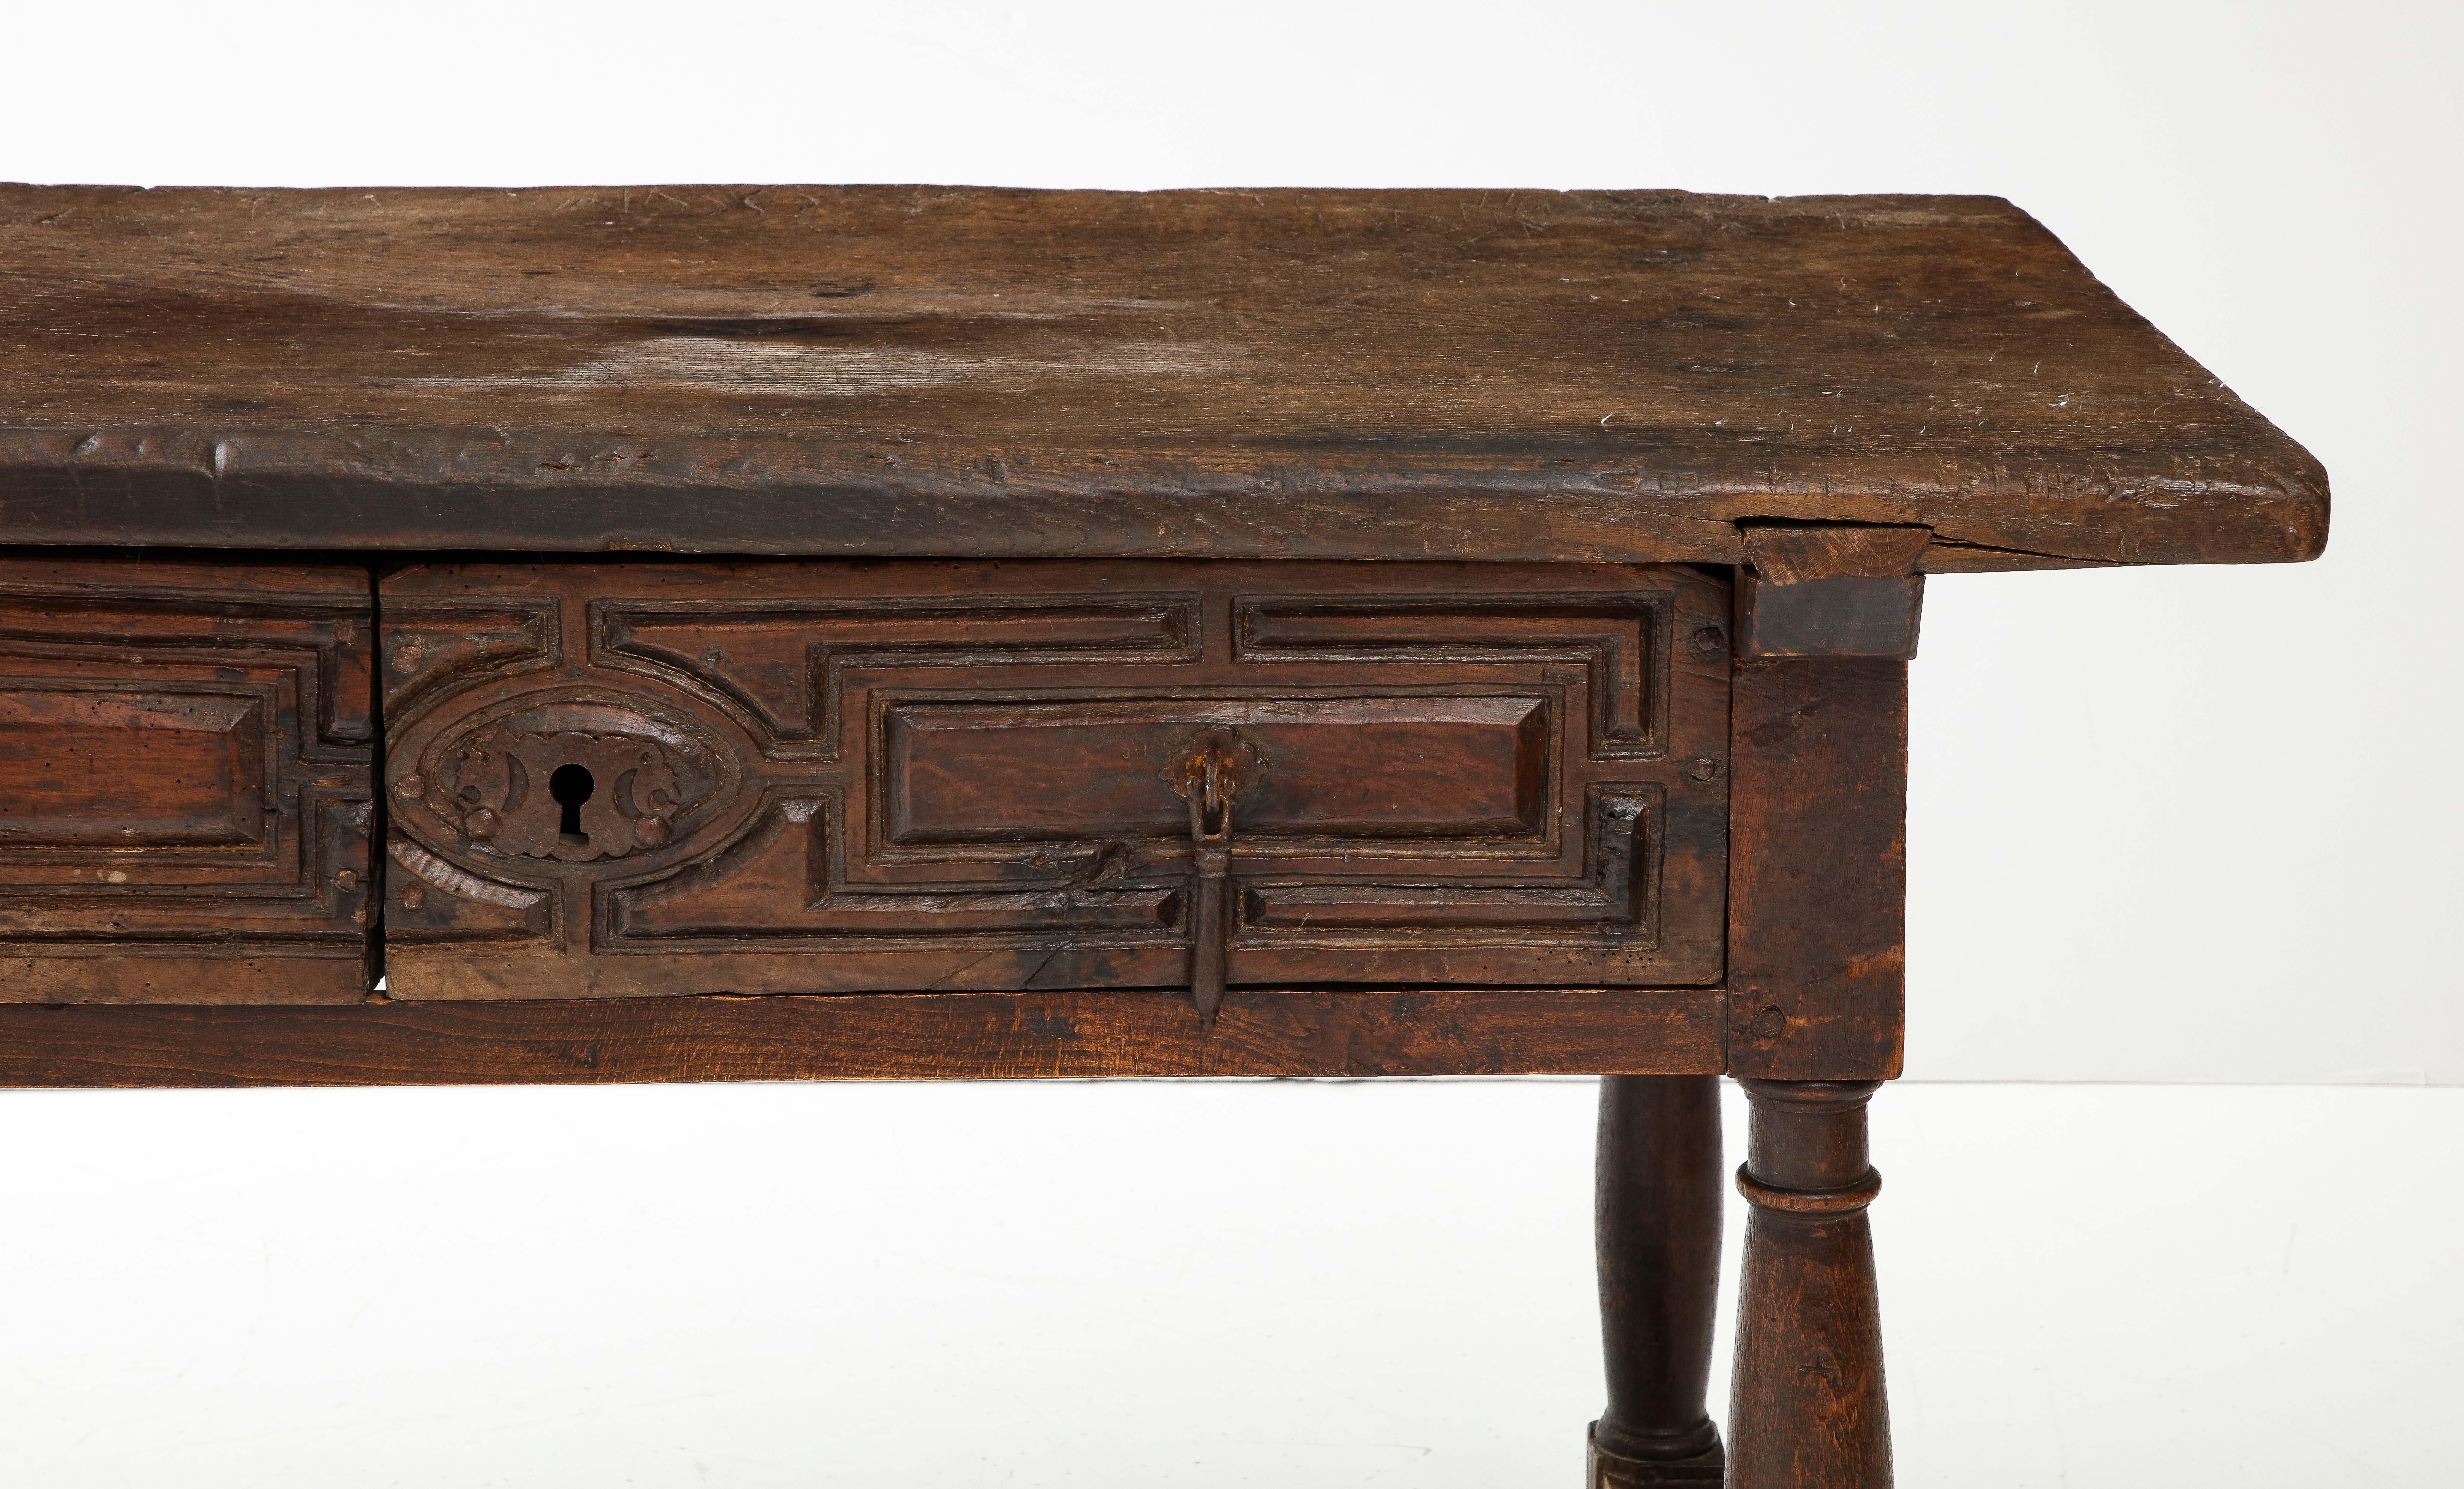 Baroque Late 16th C. Spanish Walnut Table with Iron Pulls & Drawers For Sale